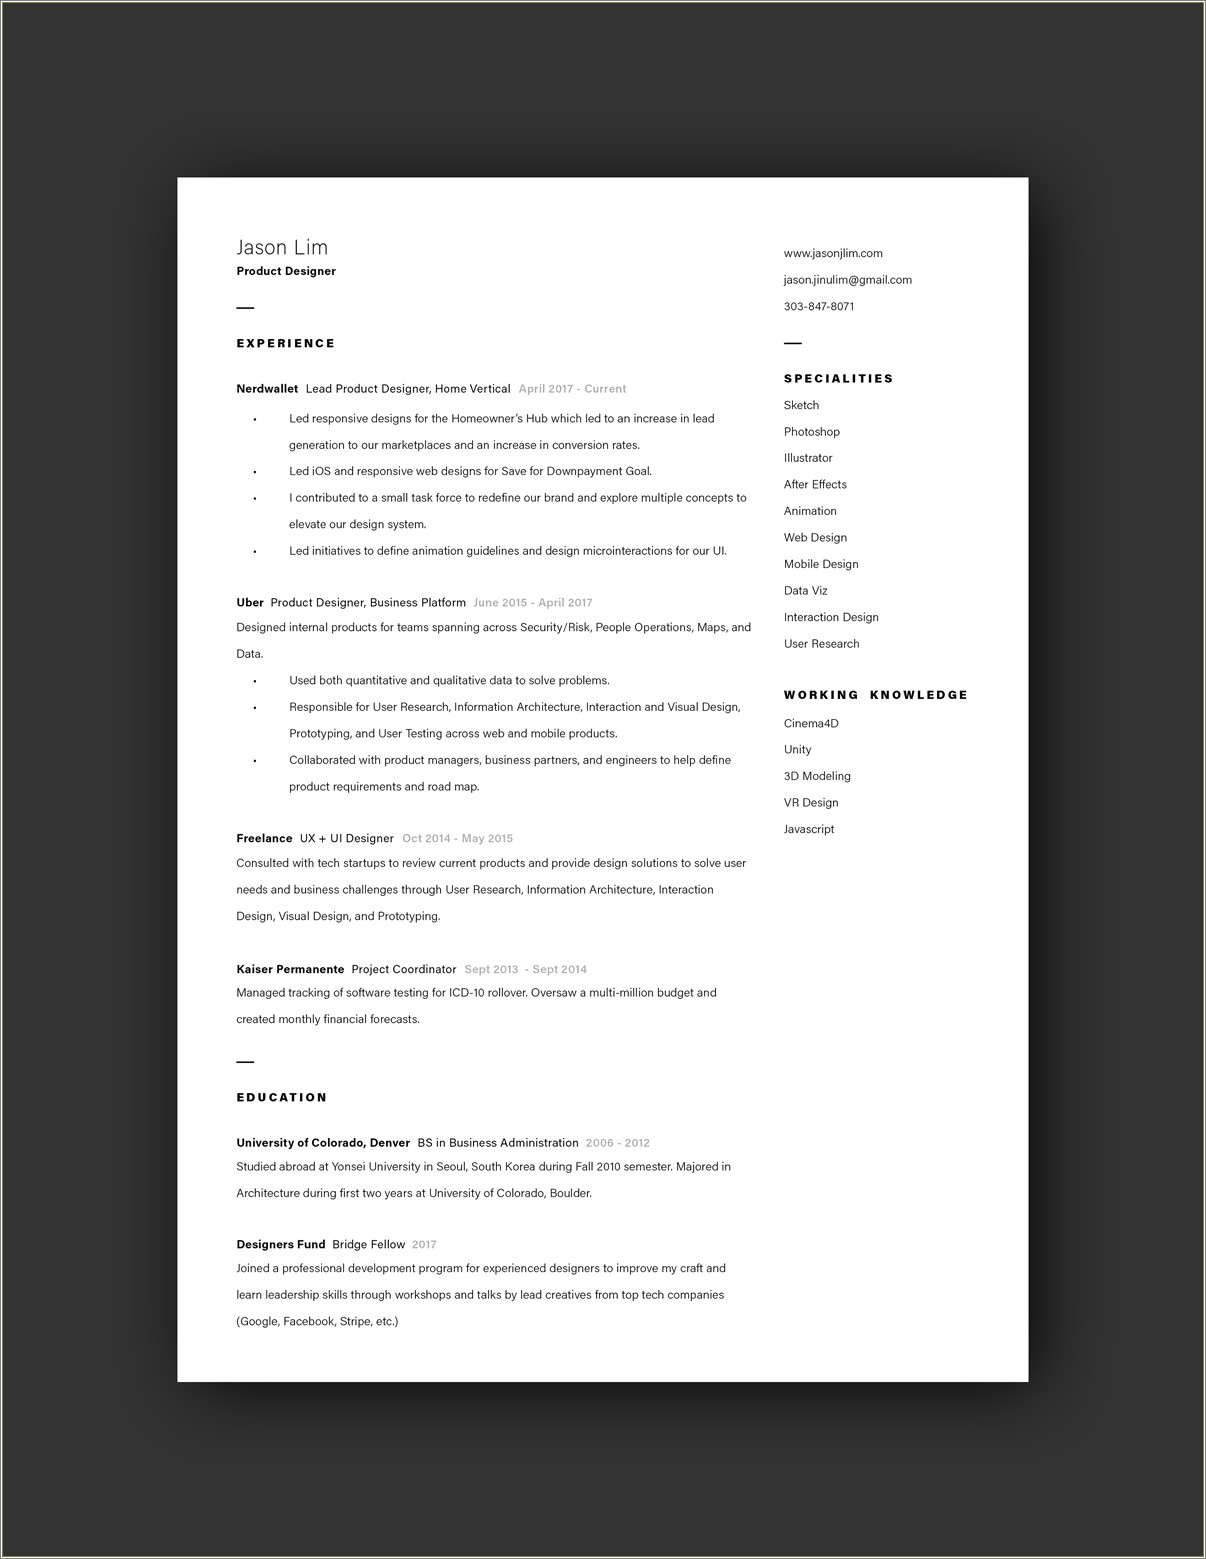 Resume Present Jobs On Top Or Bottom